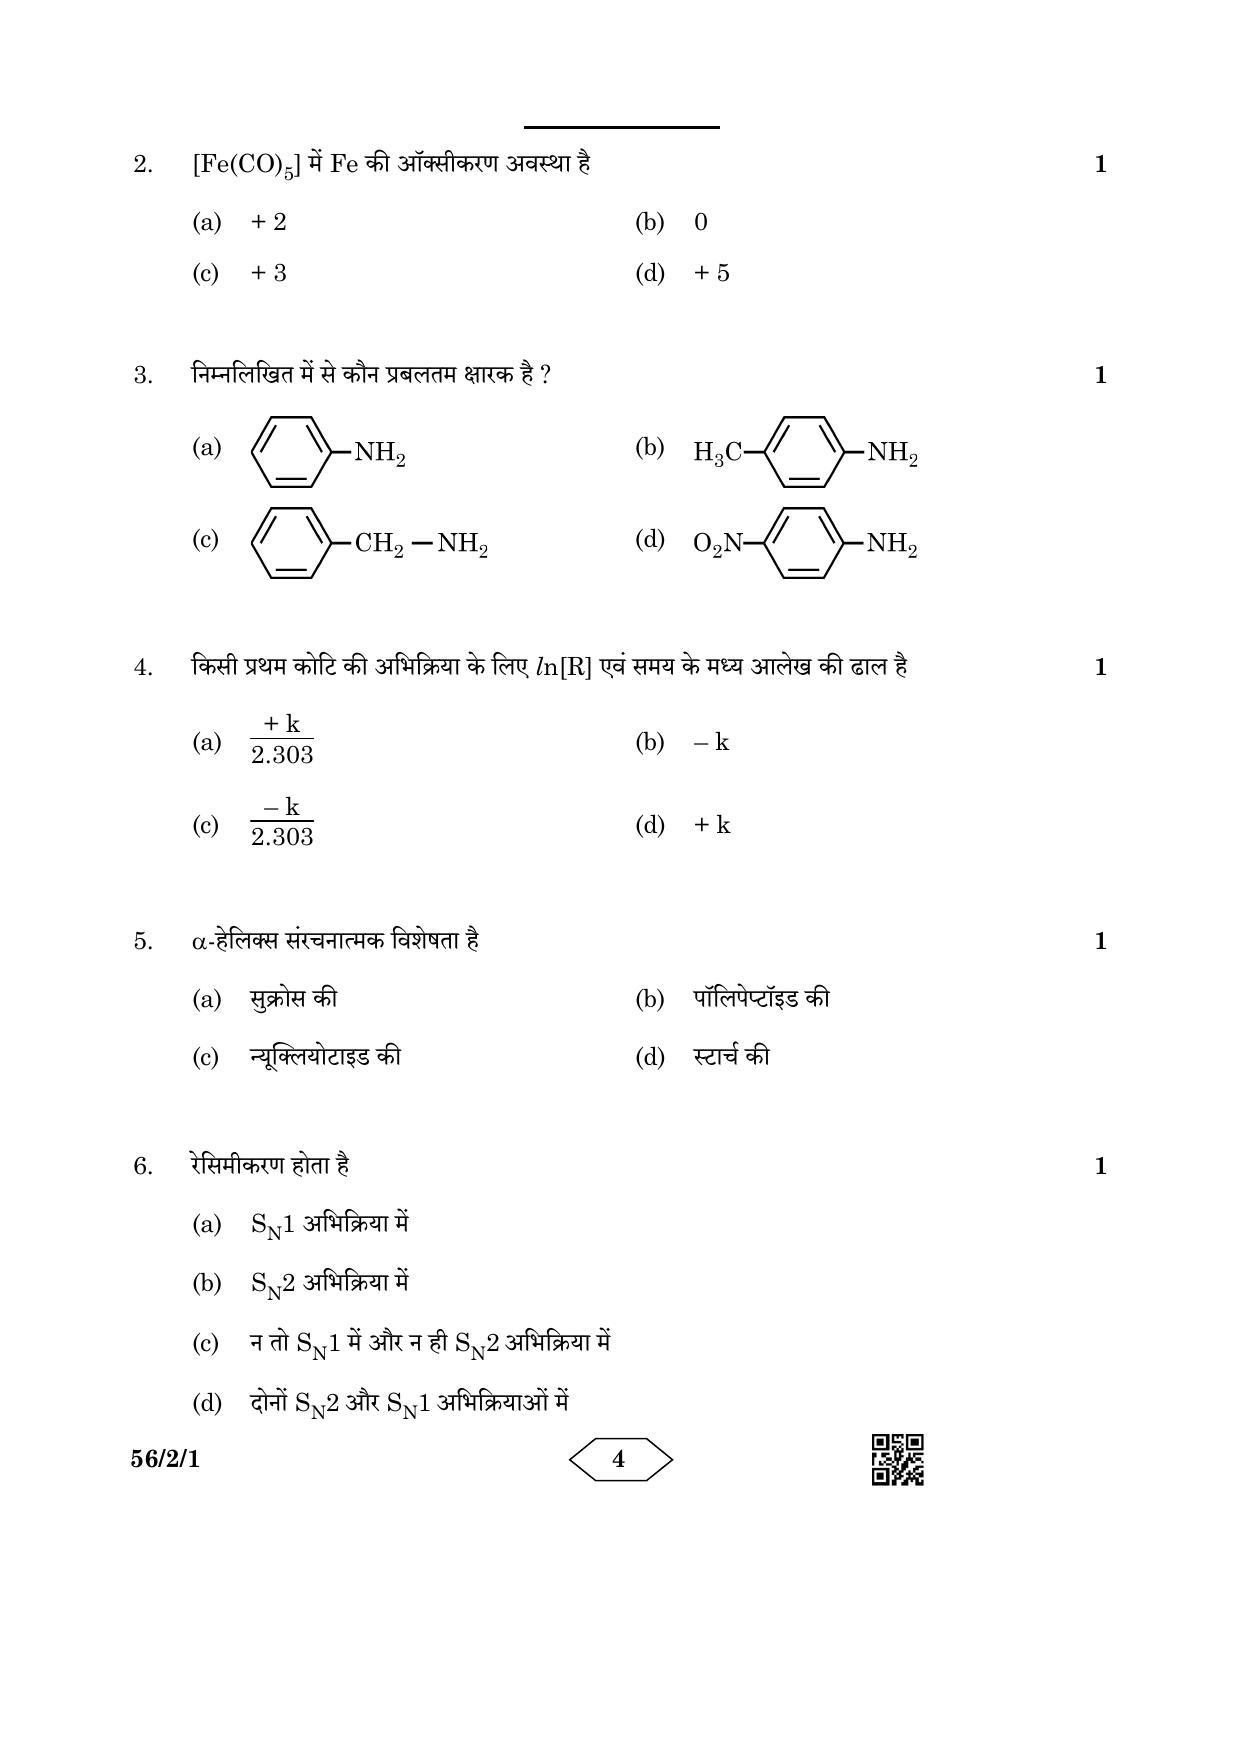 CBSE Class 12 56-2-1 Chemistry 2023 Question Paper - Page 4